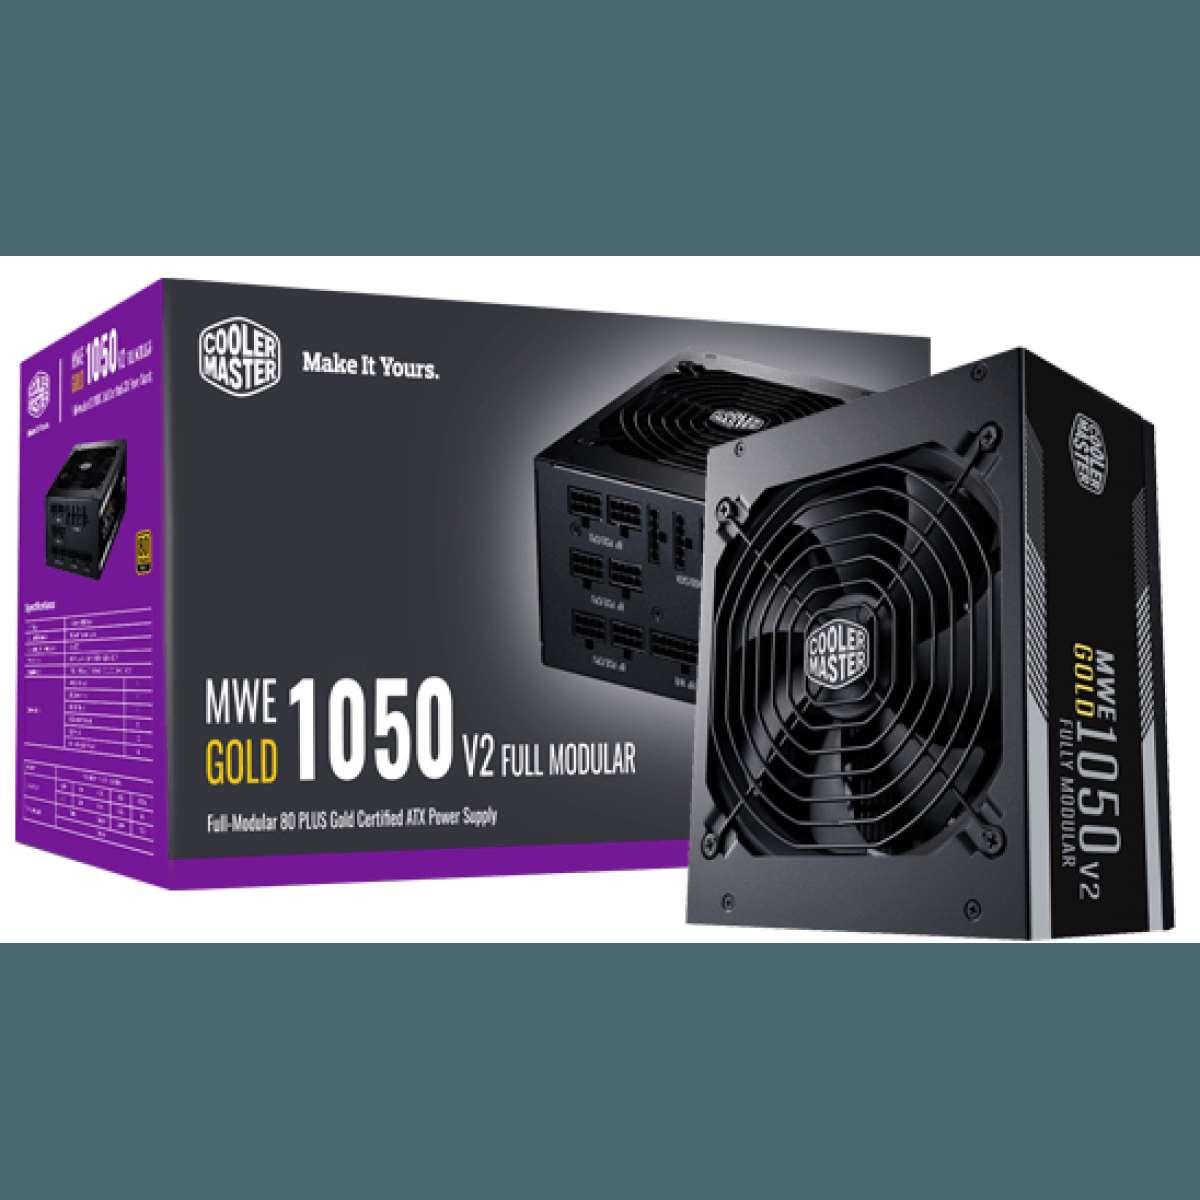 COOLER MASTER POWER SUPPLY Cooler Master MWE Gold 1050 V2 ,1050W Fully Modular  80+ Gold  Certified,RTX Ready,140mm Silent Fan Power Supply